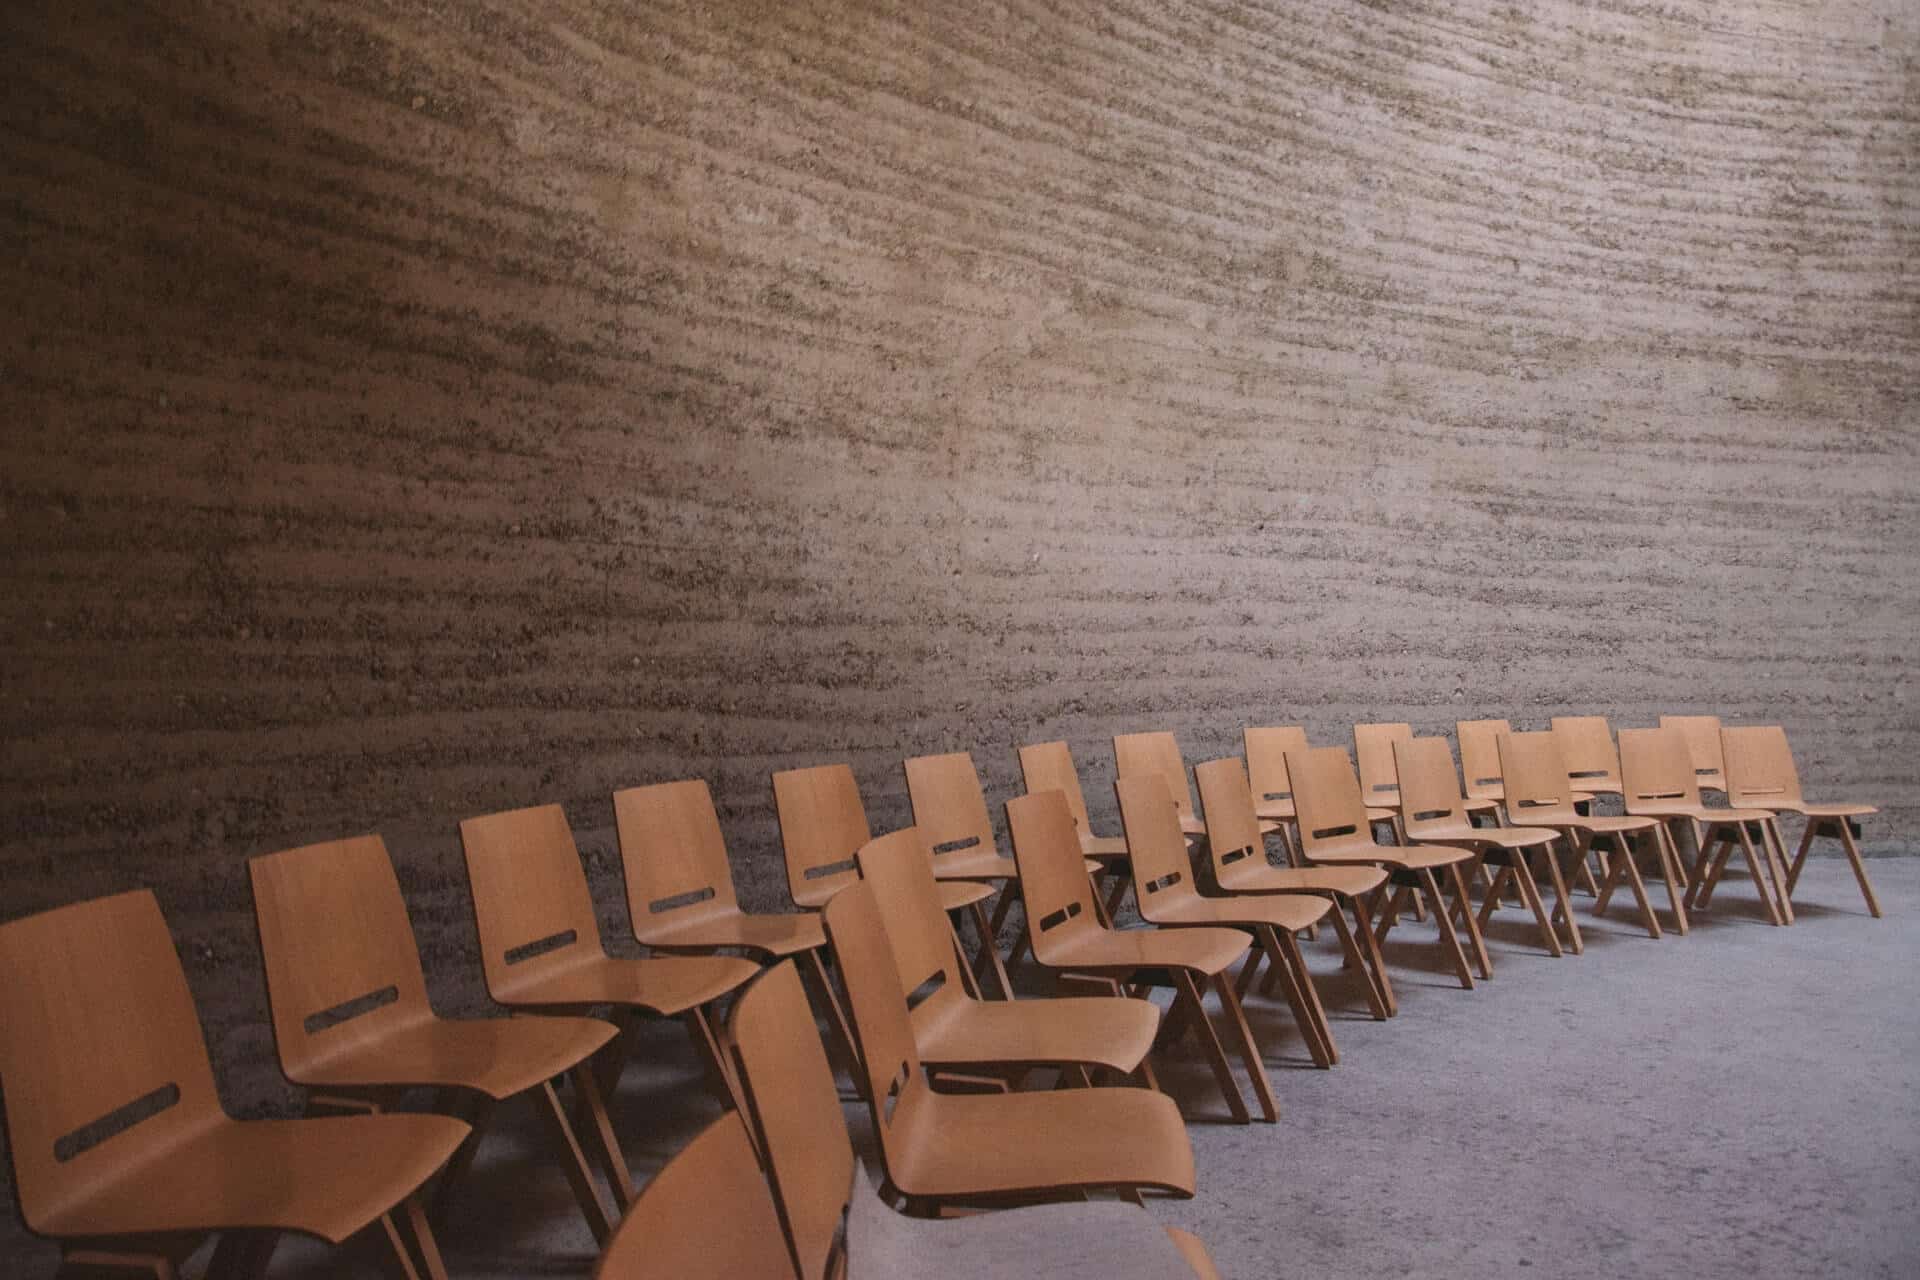 chairs arranged in a semi circle with brown walls